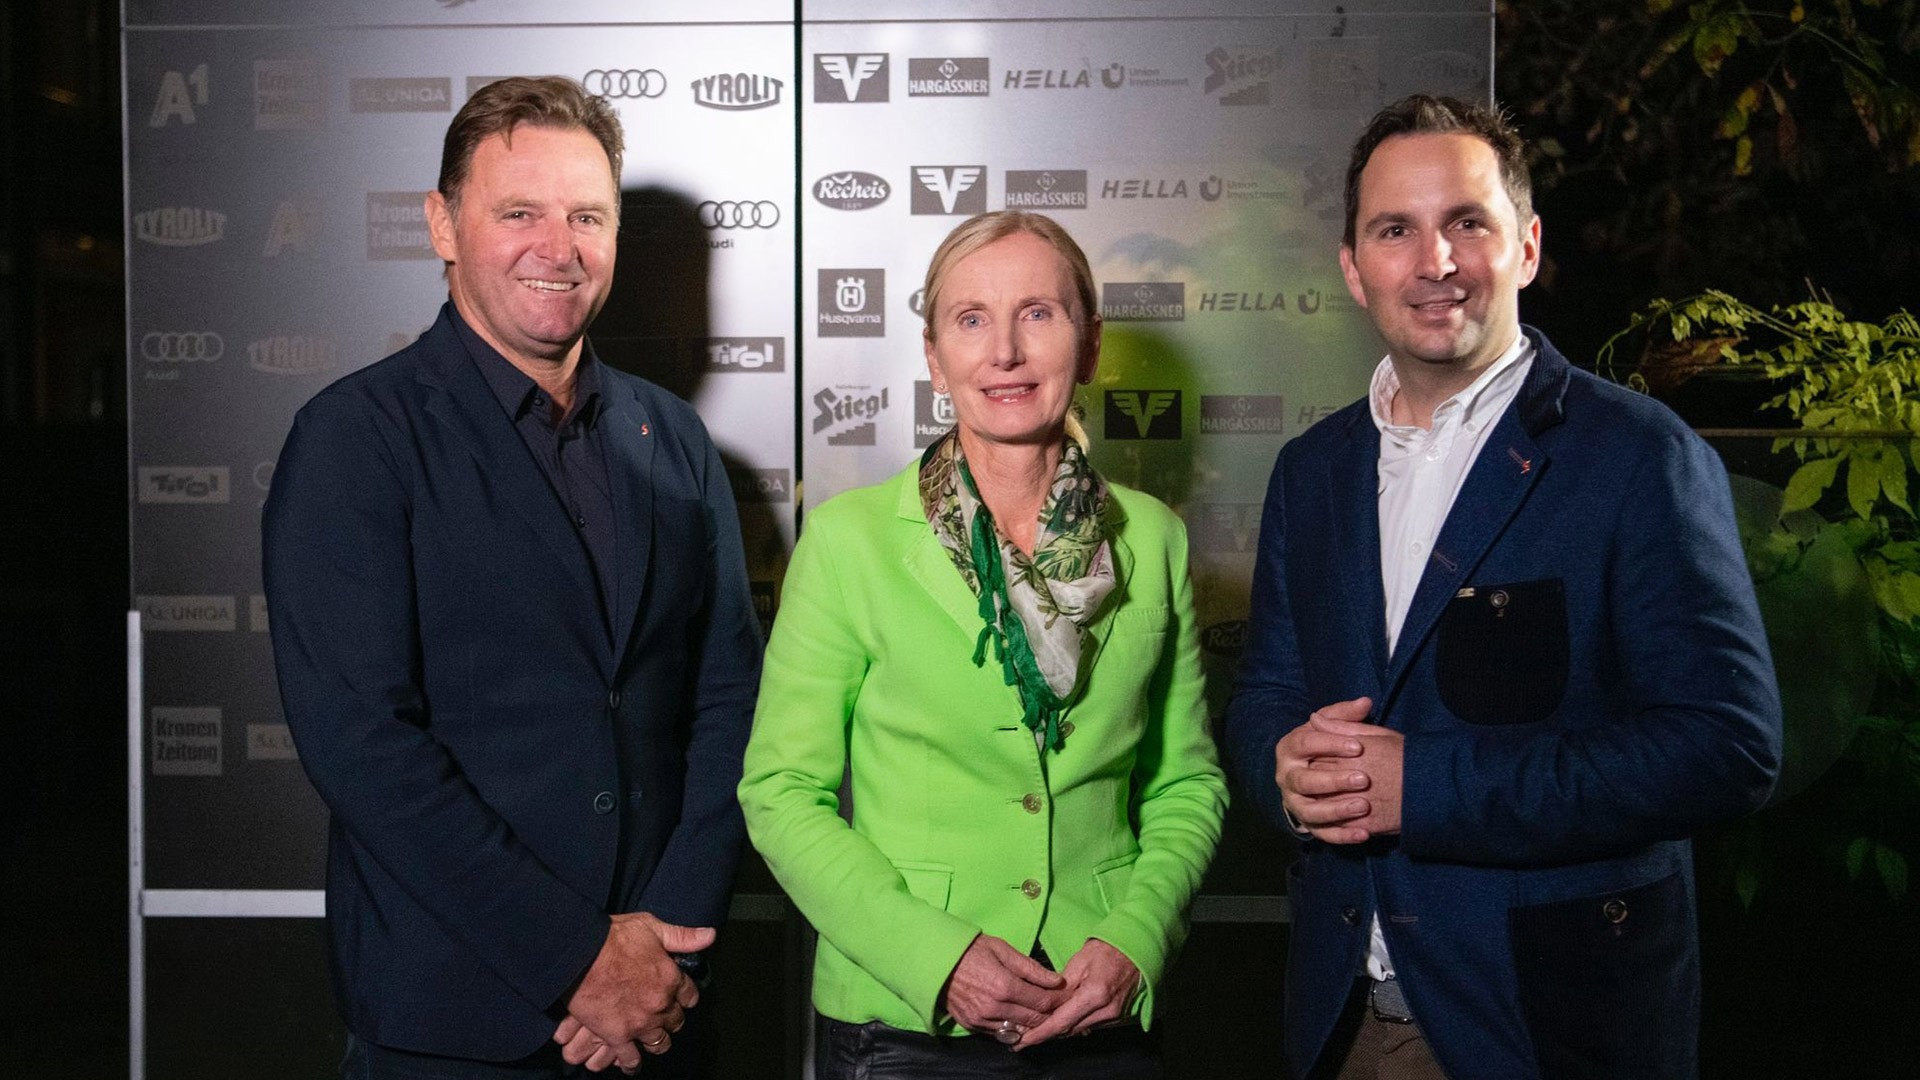 Roswitha Stadlober, centre, was elected as President of the Austrian Ski Federation earlier this month ©ÖSV